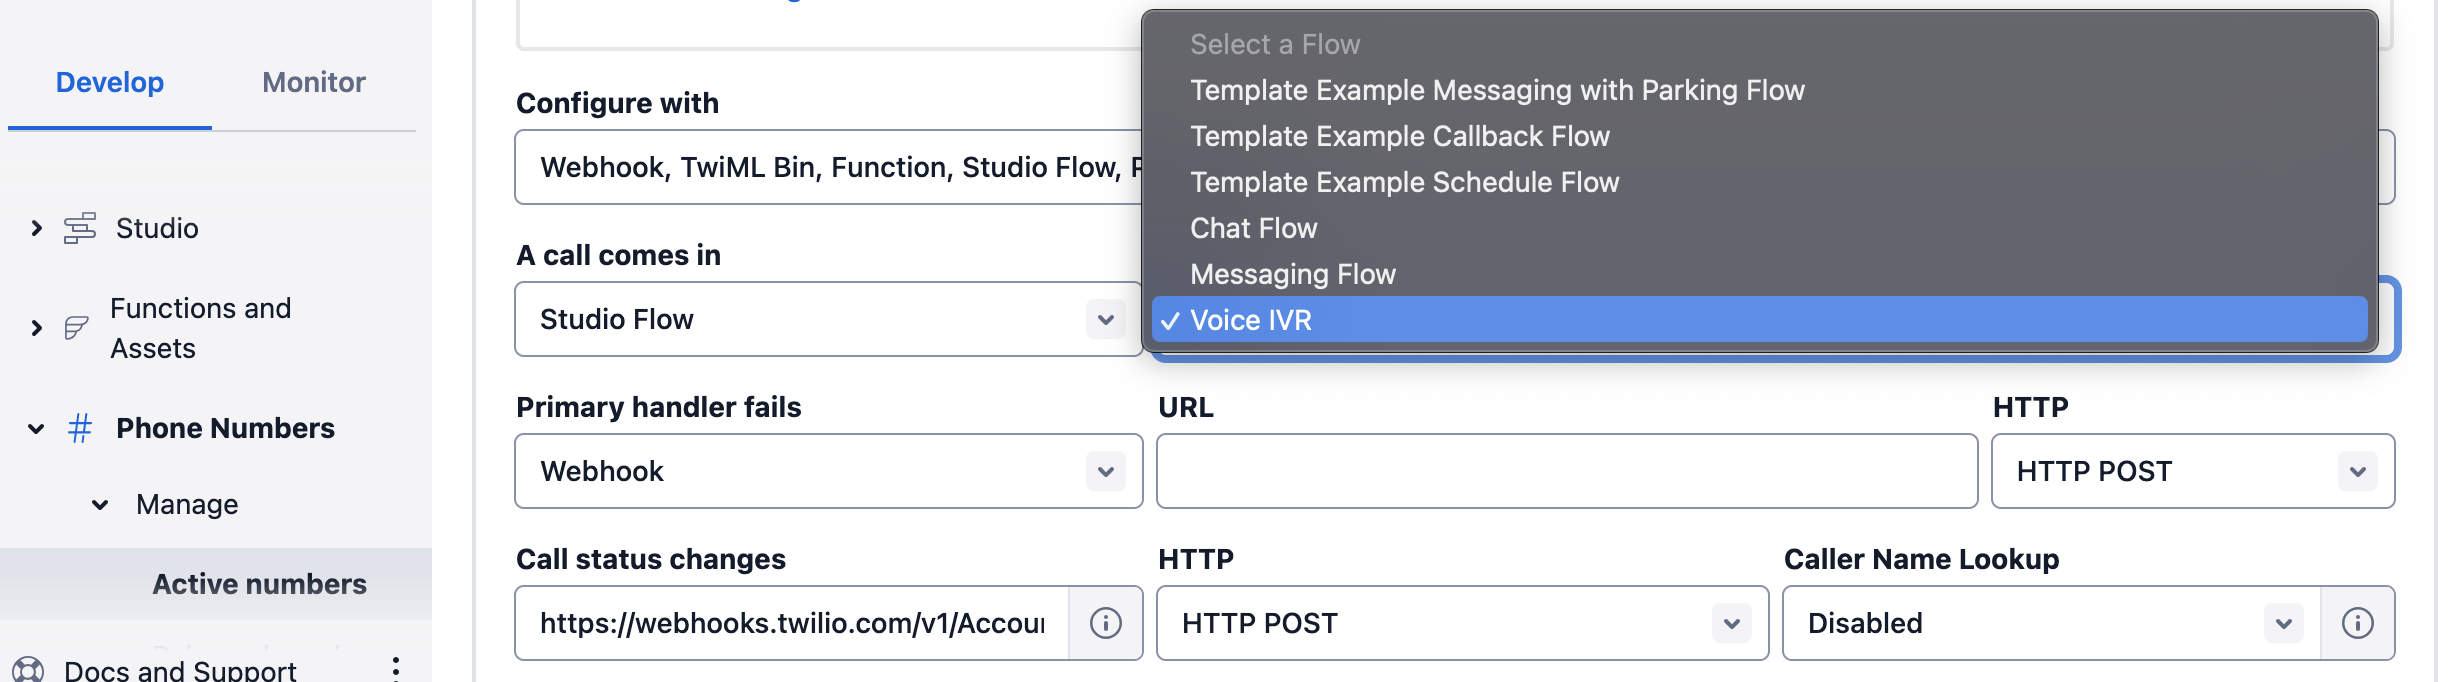 A screenshot showing how to select the Template Example Callback Flow.